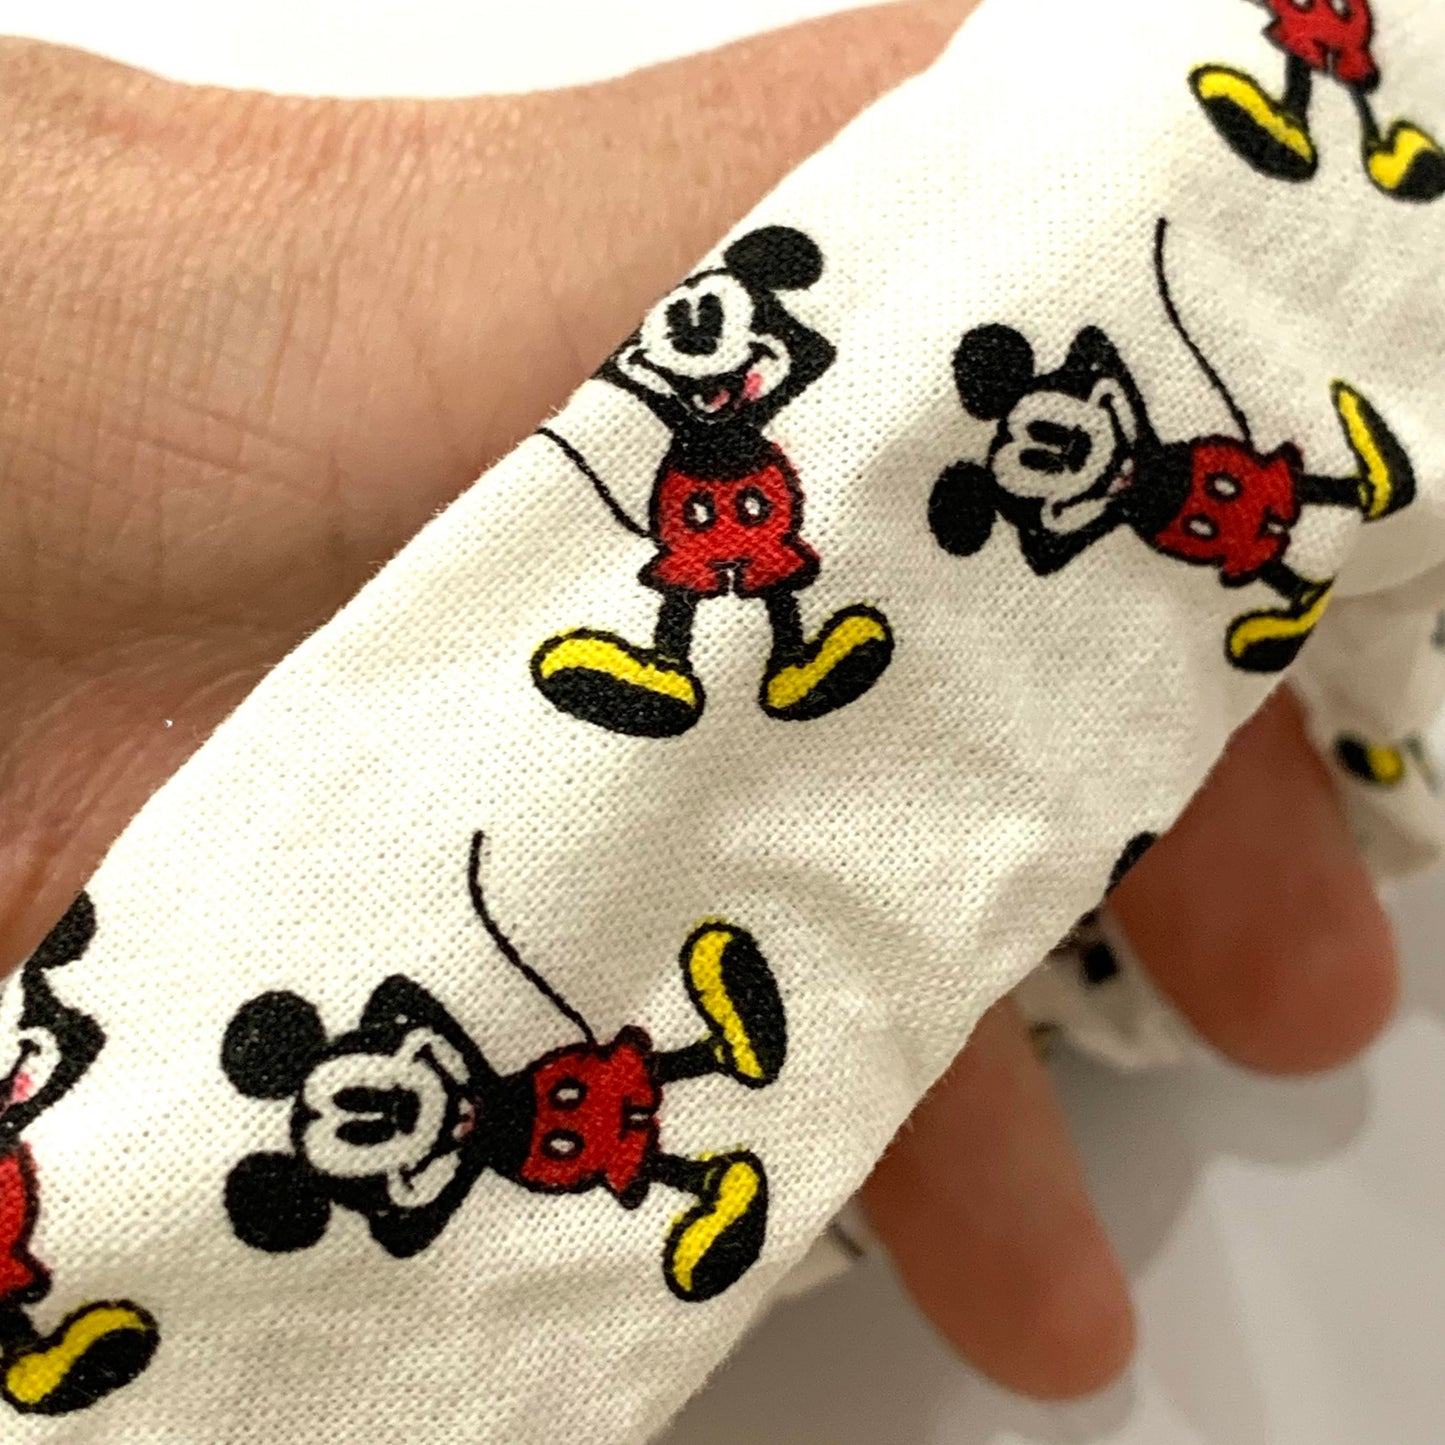 MAKIN' WHOOPEE - "Mickey Mouse" REGULAR SCRUNCHIES